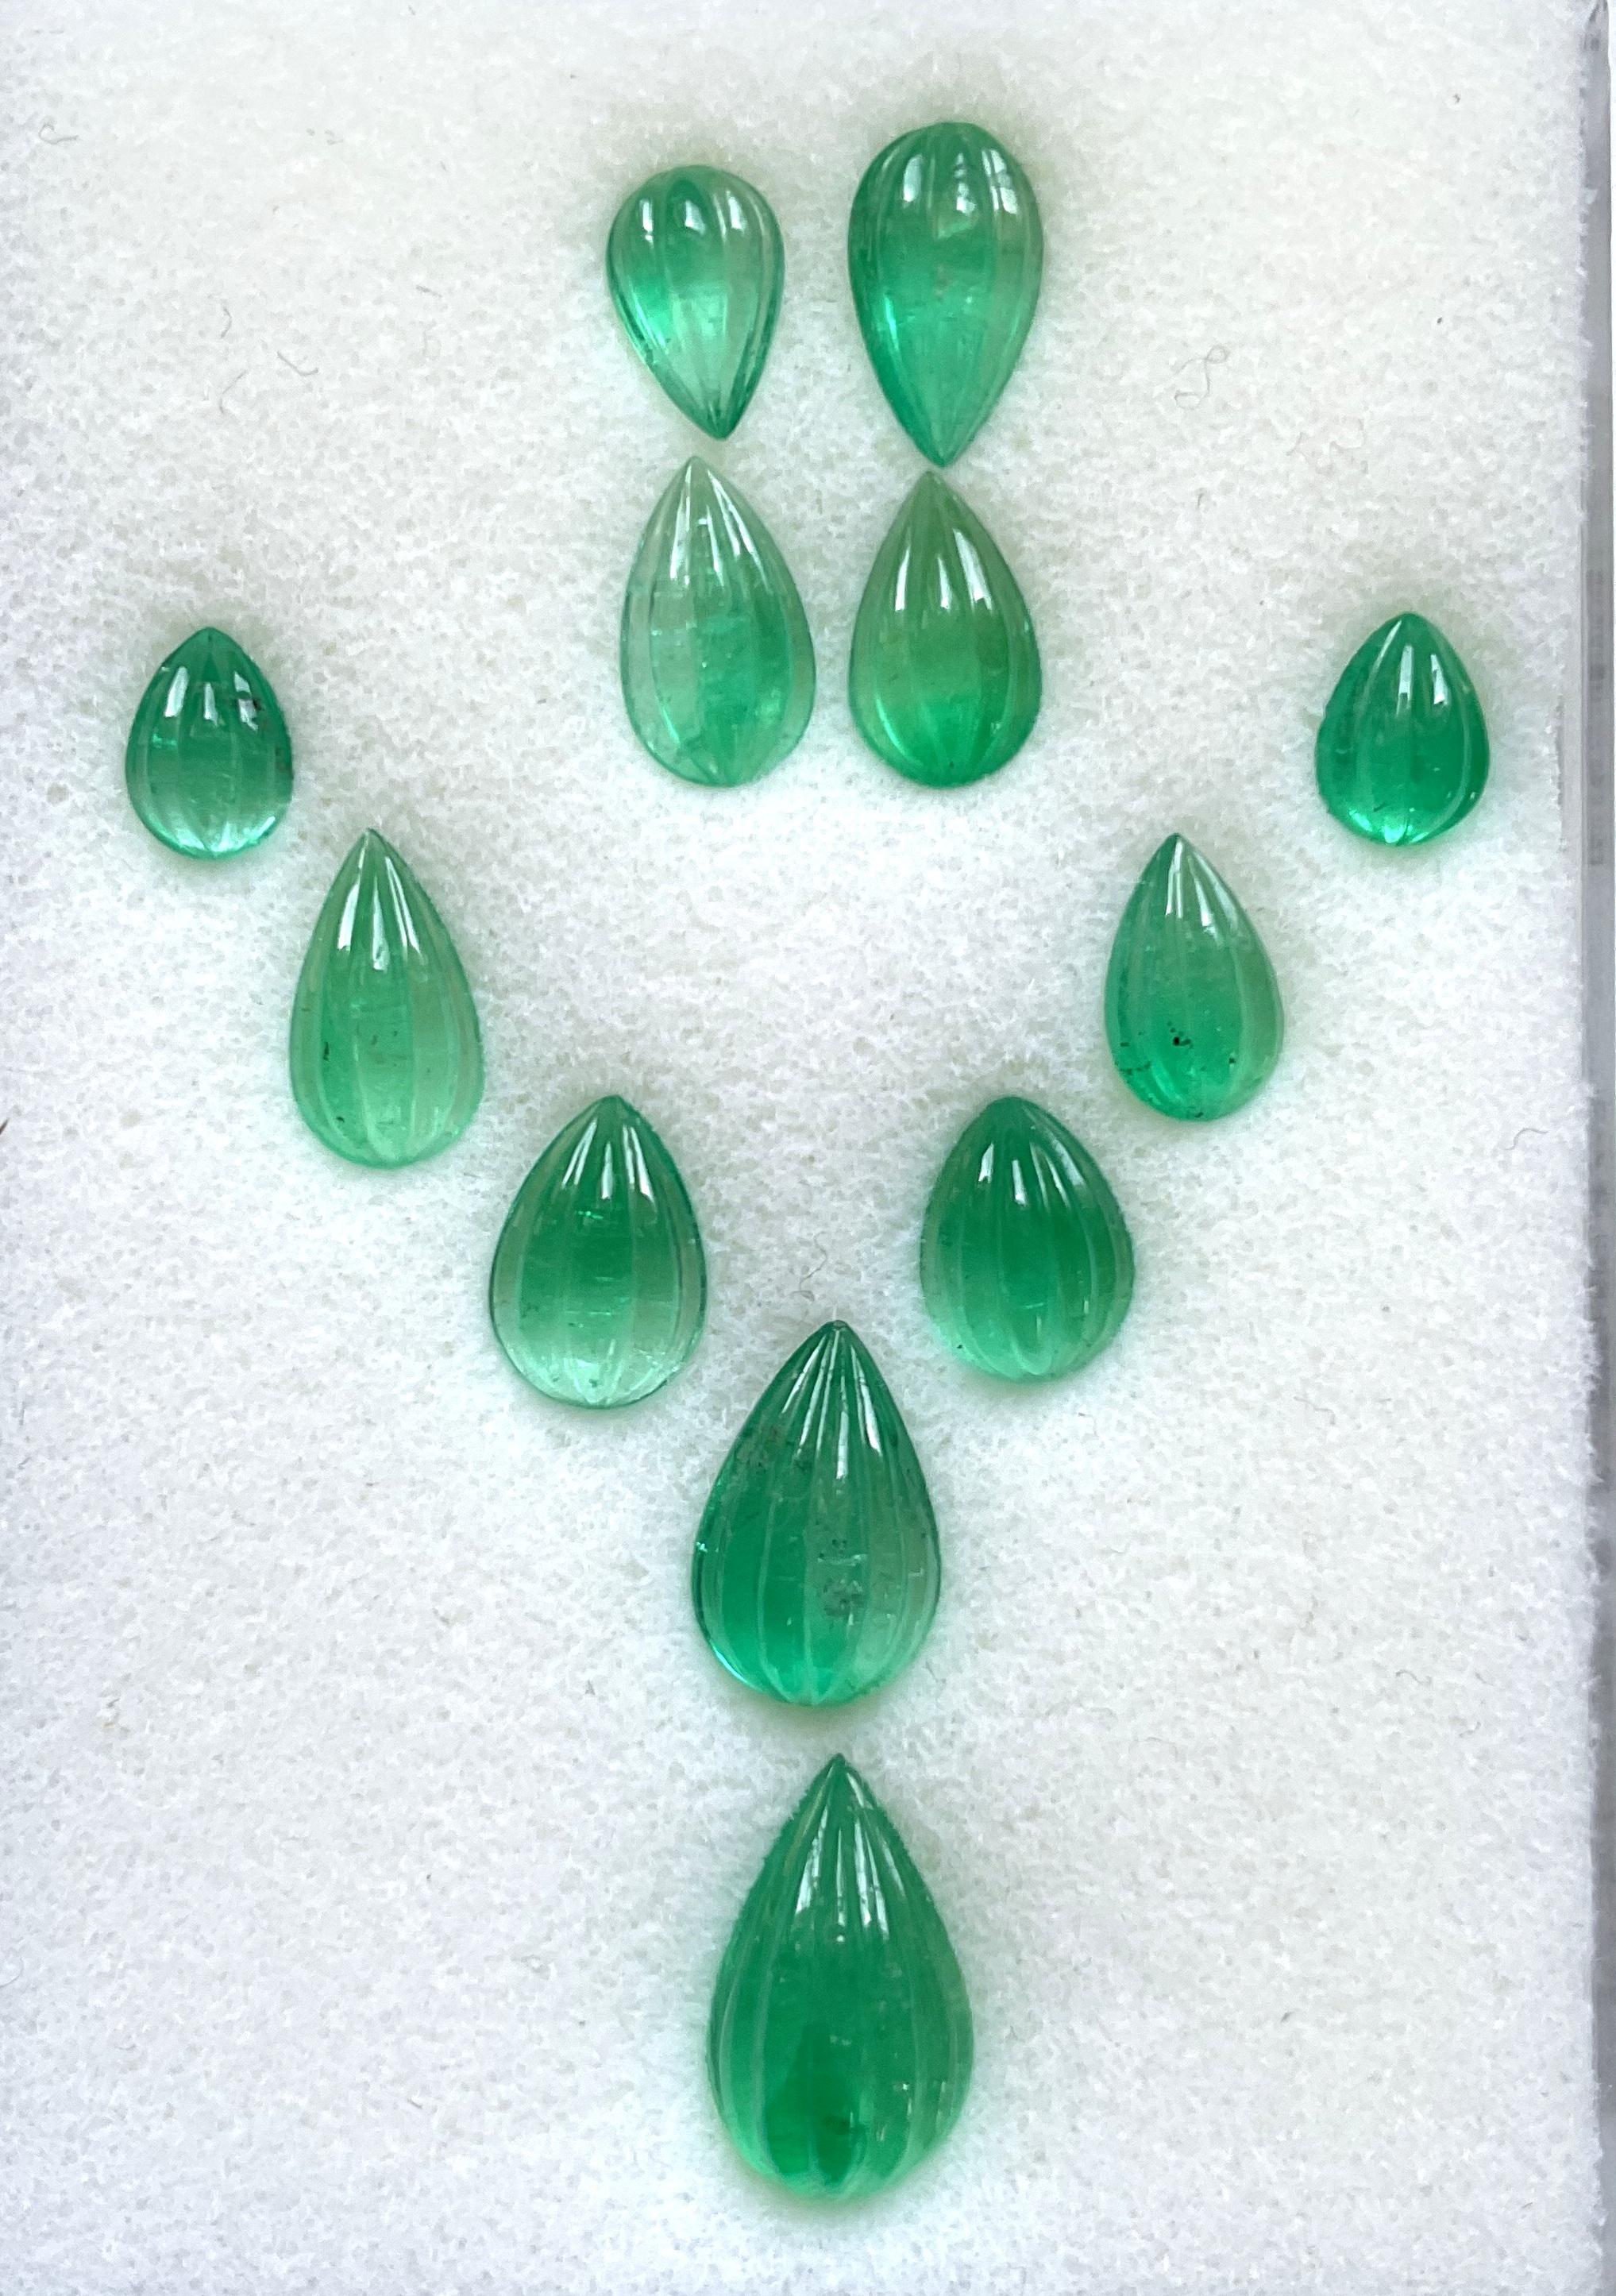 23.14 Carats Colombian Top Emerald Carved Pear Cabochon Layout Natural Gemstone
Gemstone - Emerald
Weight - 23.14 carats
Shape - Carved Cabochon Pear
Size - 5.5 x 7.5 To 9x15 MM
Quantity - 12 Pieces